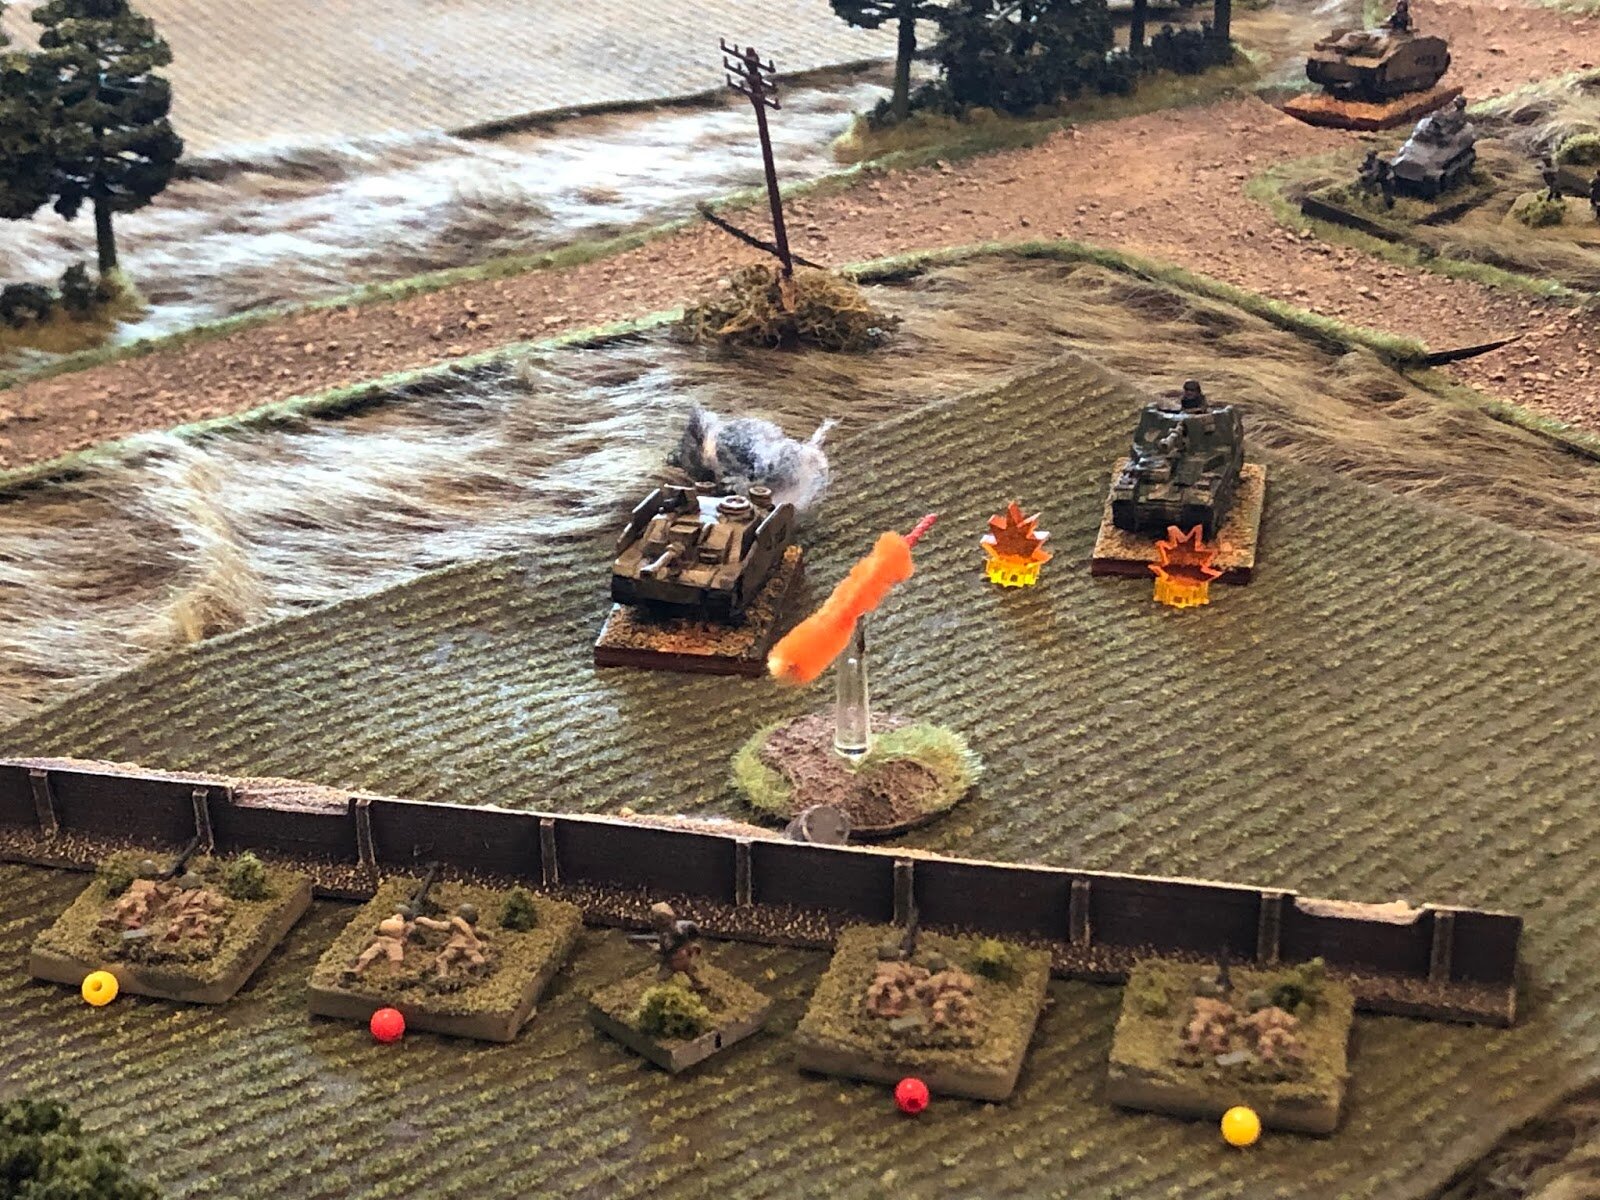 And they are immediately followed by their comrades from the ATR Platoon engaging the Marder...